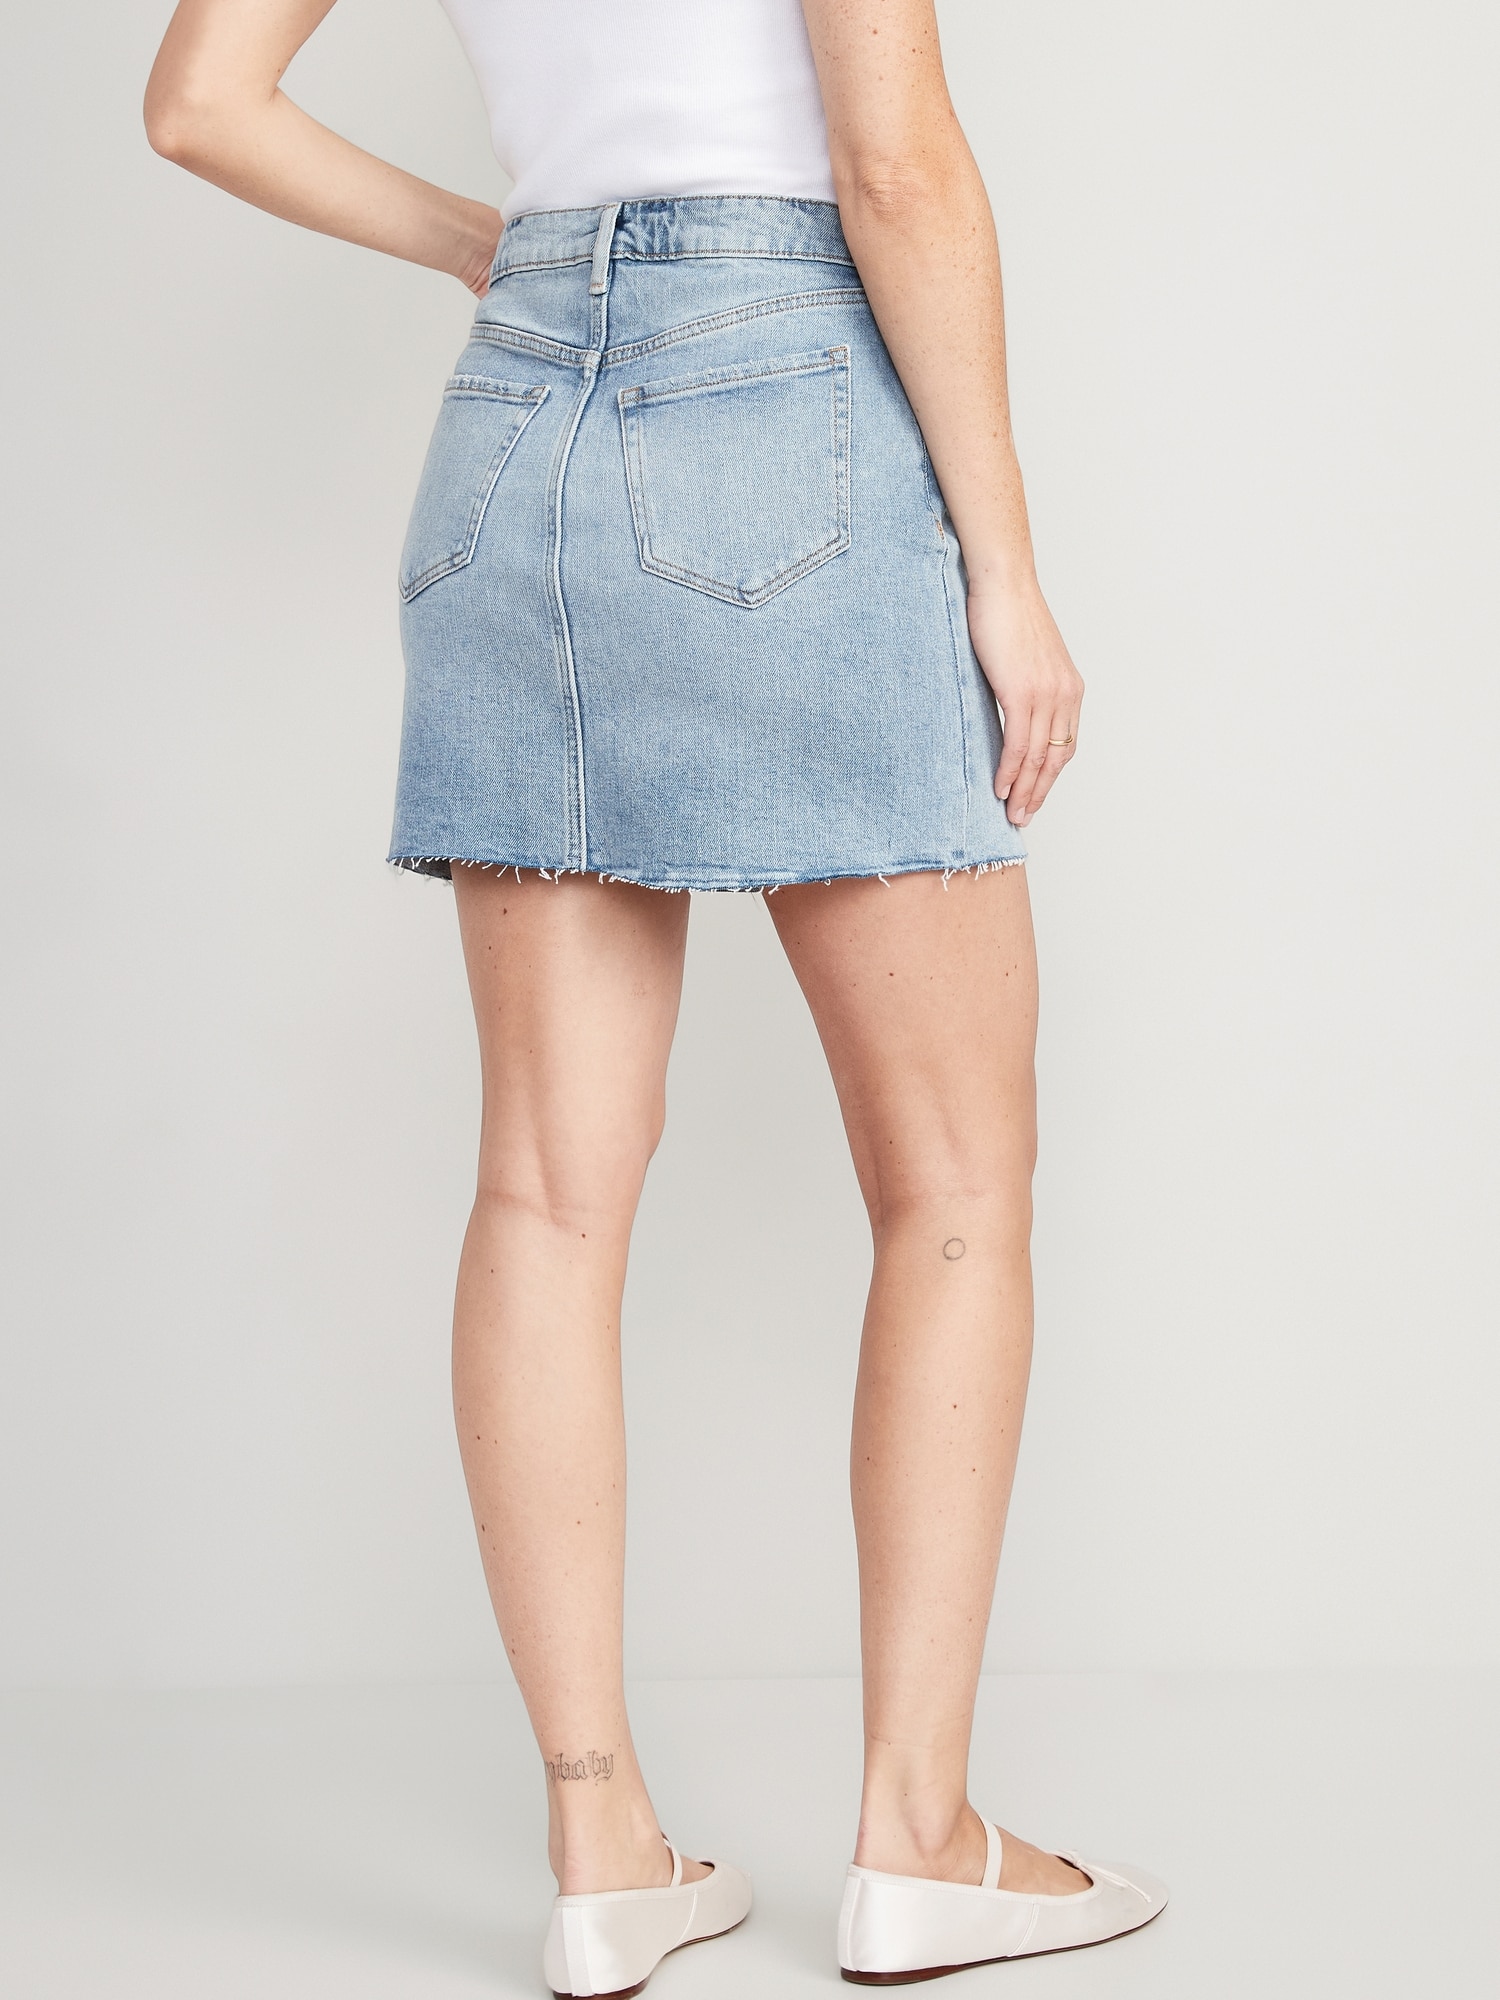 18 Long Denim Skirts to Buy Now - Coveteur: Inside Closets, Fashion,  Beauty, Health, and Travel